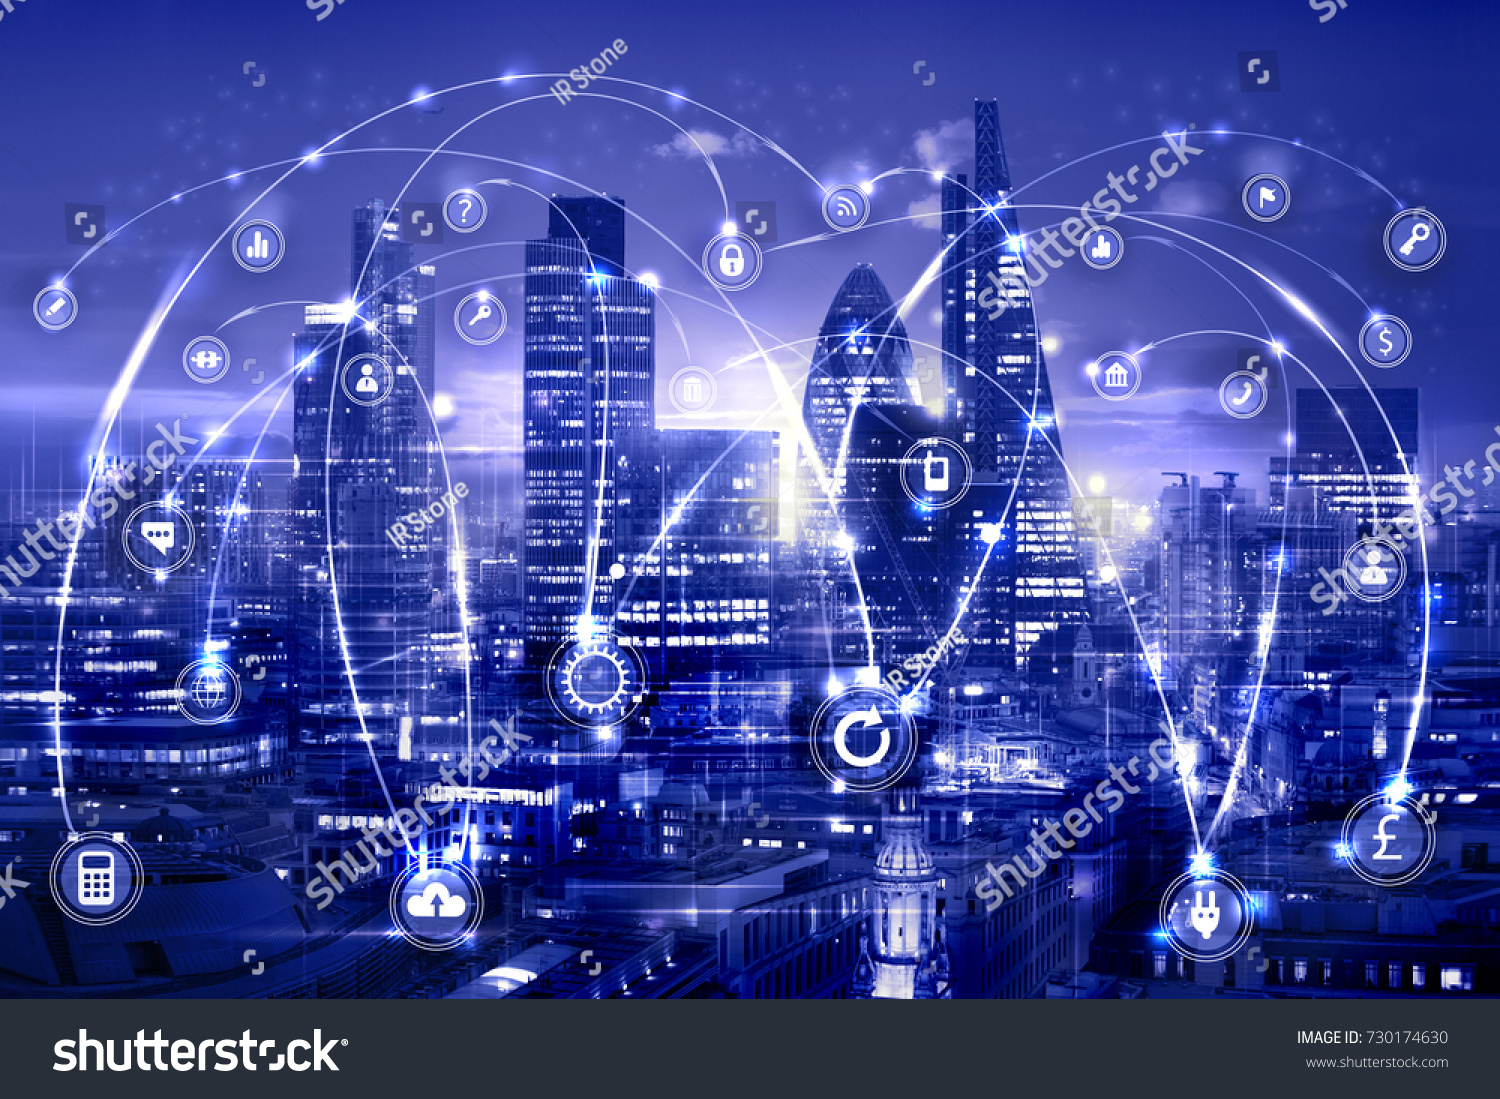 City of London at sunset and business network connections concept illustration with lots of business icons. Technology, transformation and innovation idea.  #730174630